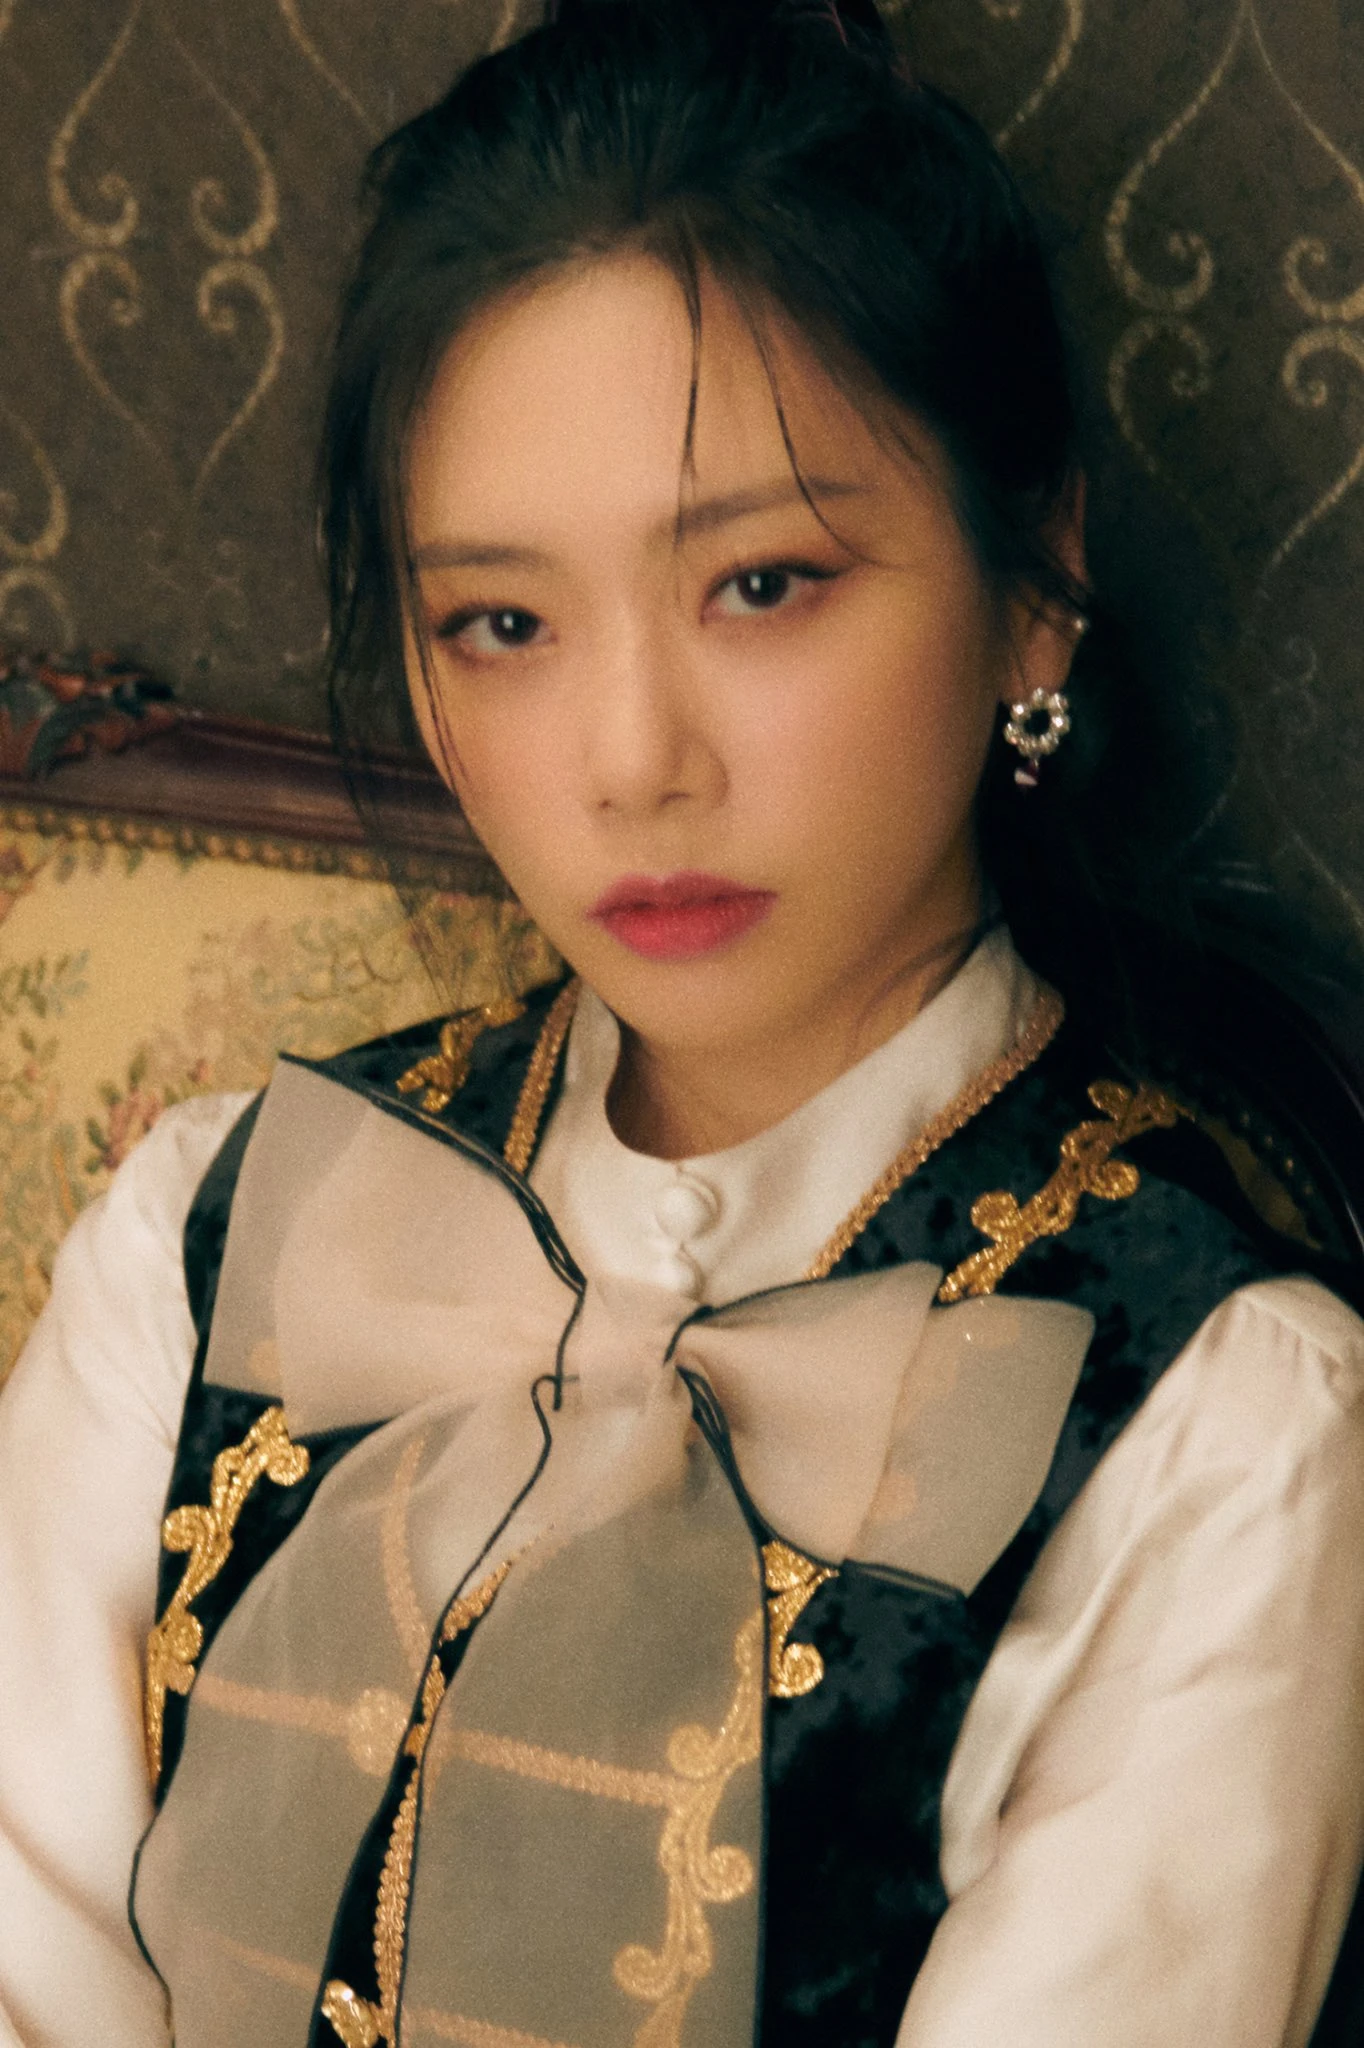 Dreamcatcher - Eclipse is the fourth Japanese Single teasers 